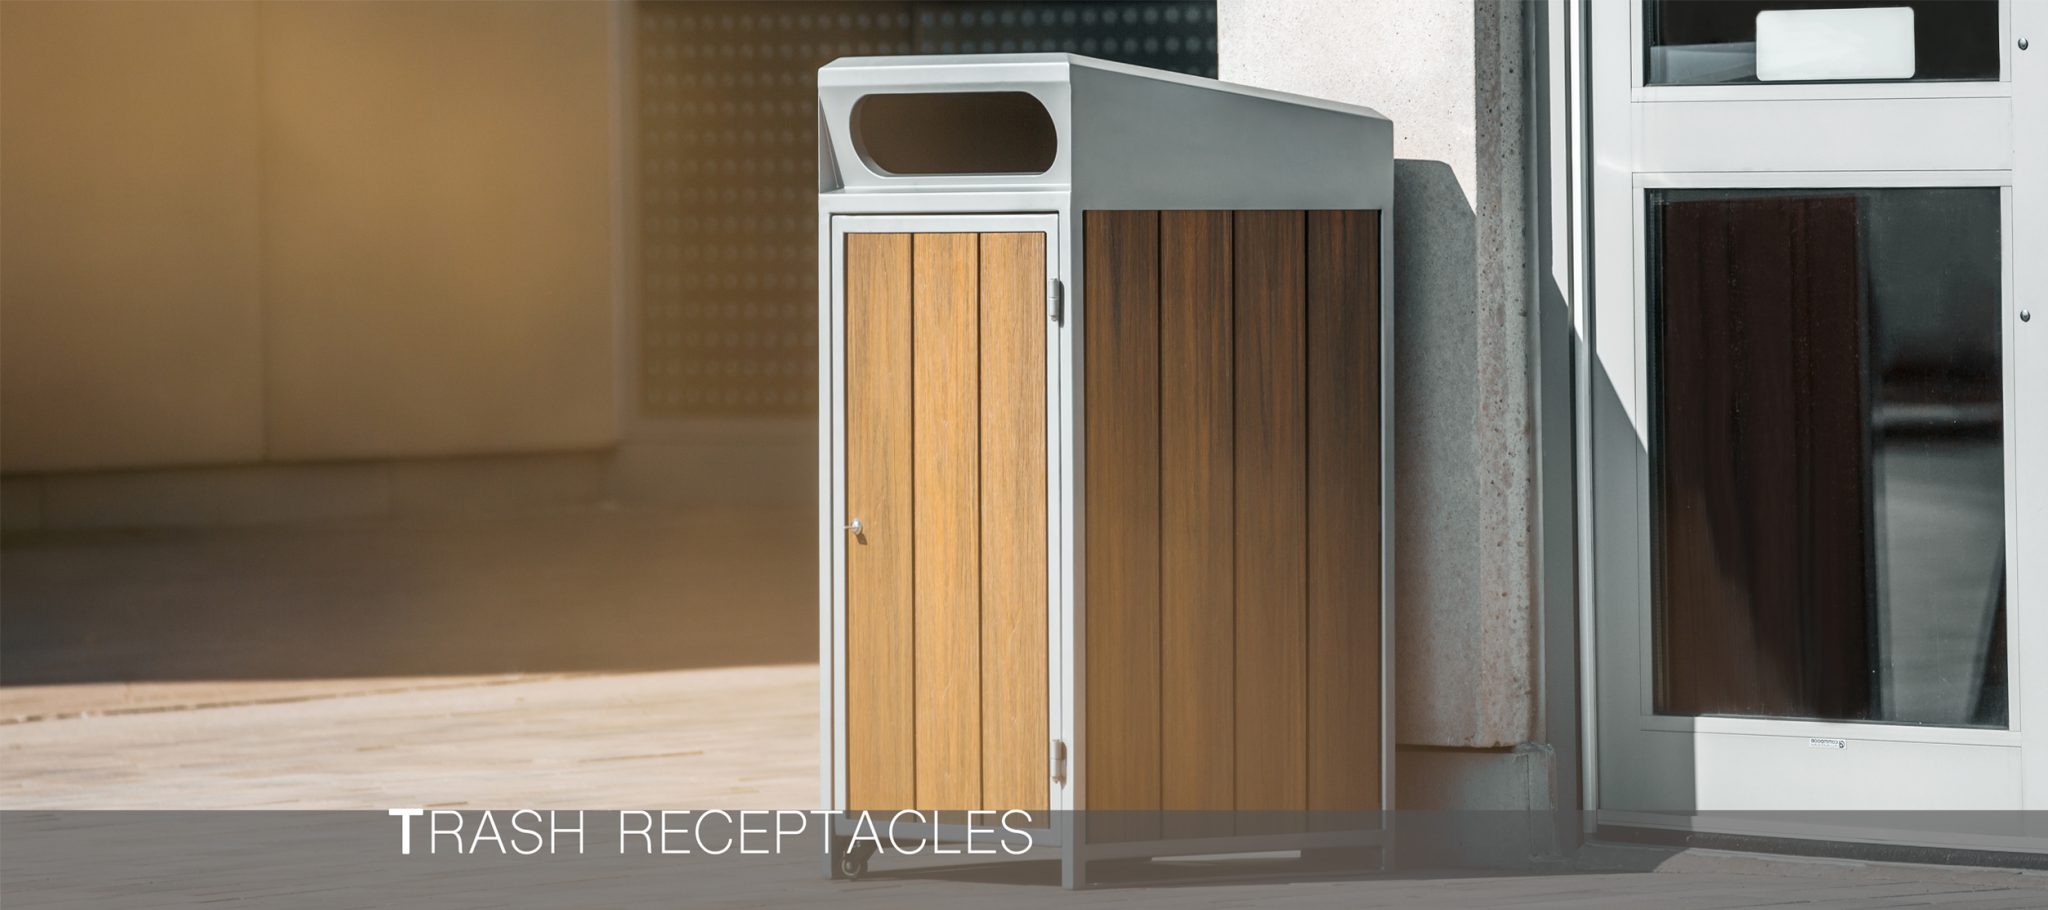 commercial outdoor recycled plastic trash bin satisfies waste management and aesthetic needs at the same time